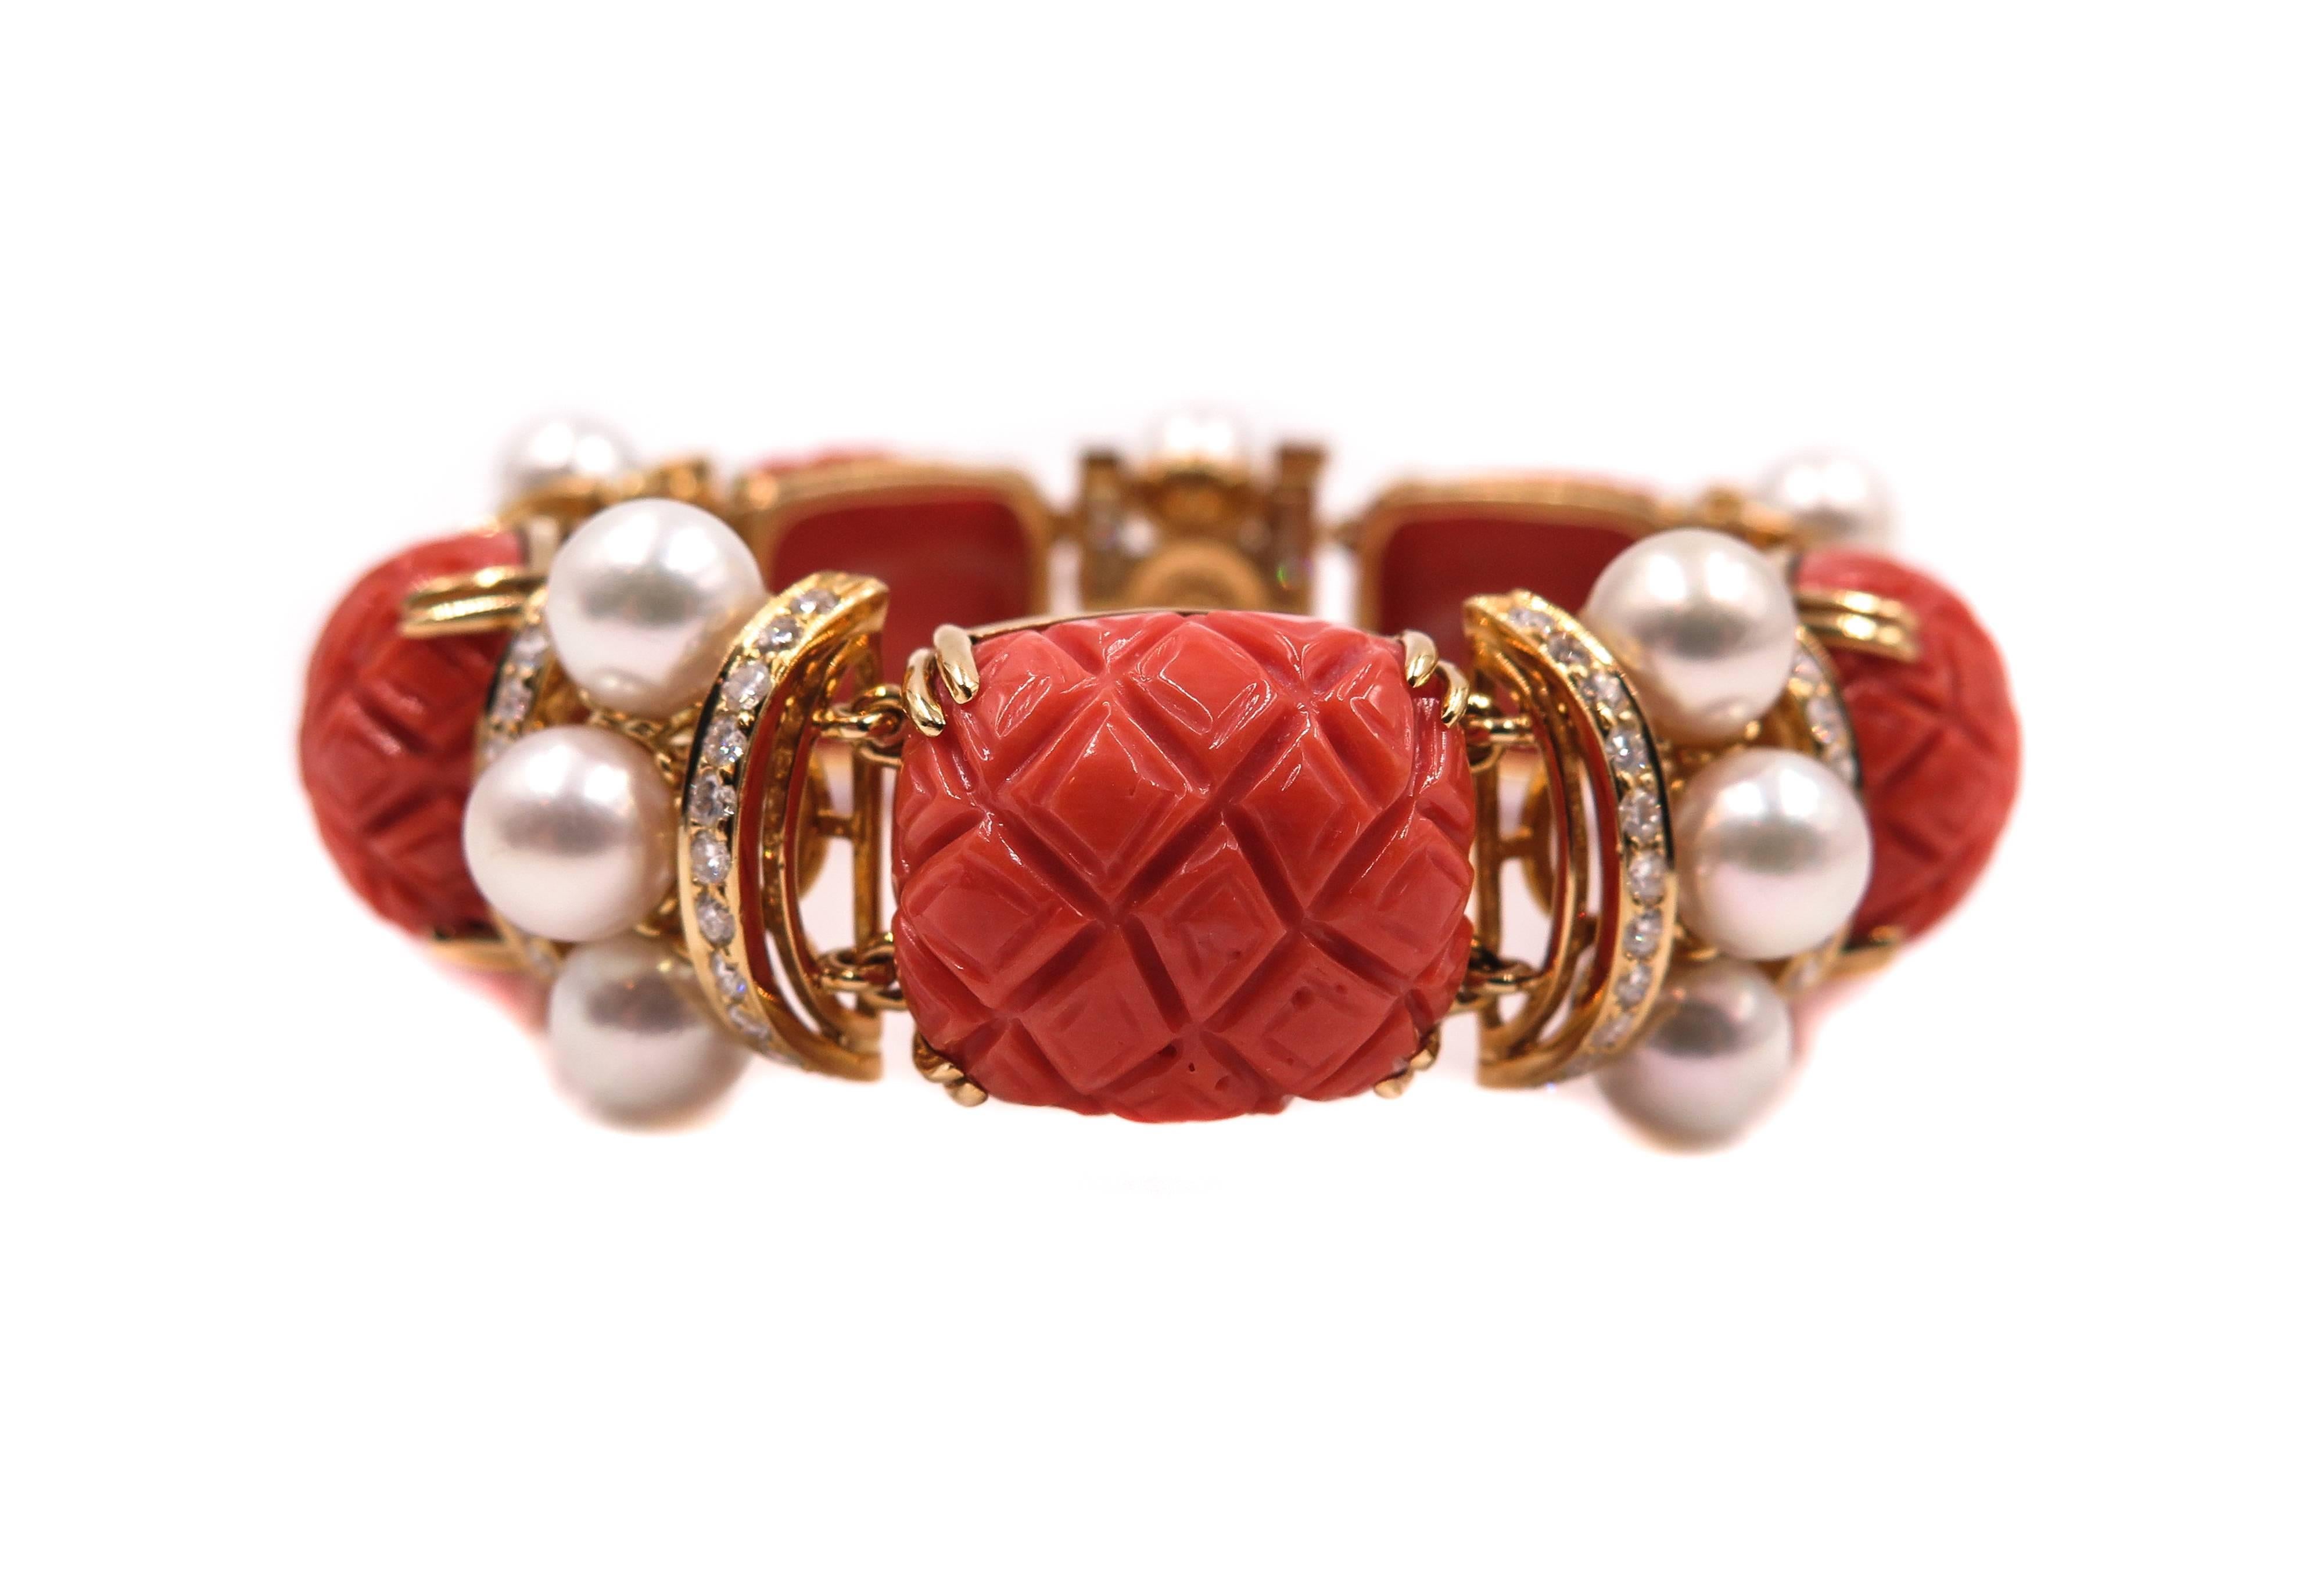 Women's Carved Coral, Pearls and Diamond Bracelet by Seaman Schepps